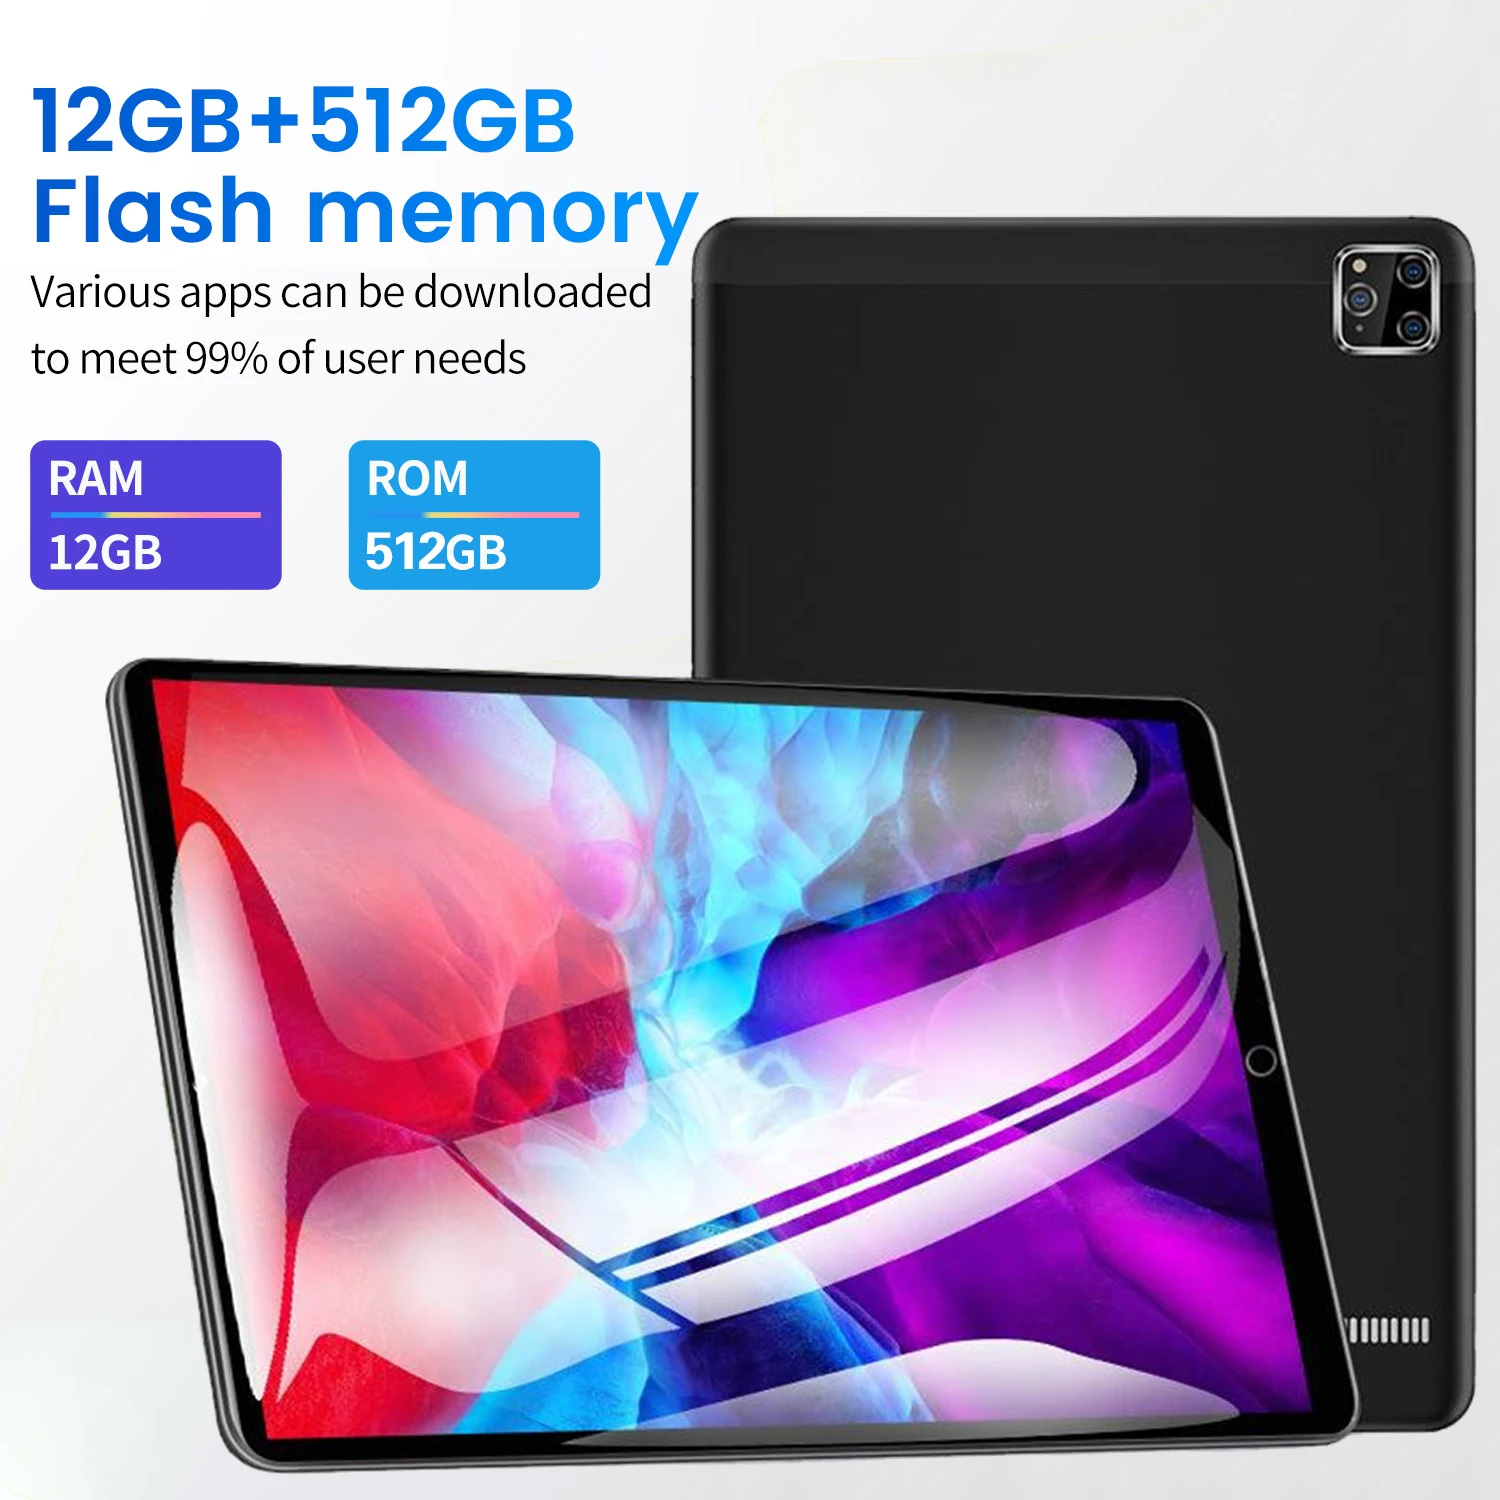 note taking tablet with pen 5G Tablet PC 12GB RAM 512GB ROM Global Version New Pad 10.1 Inch 32MP Camera 12 Core WIFI Google Play Dual Call GPS latest tablets